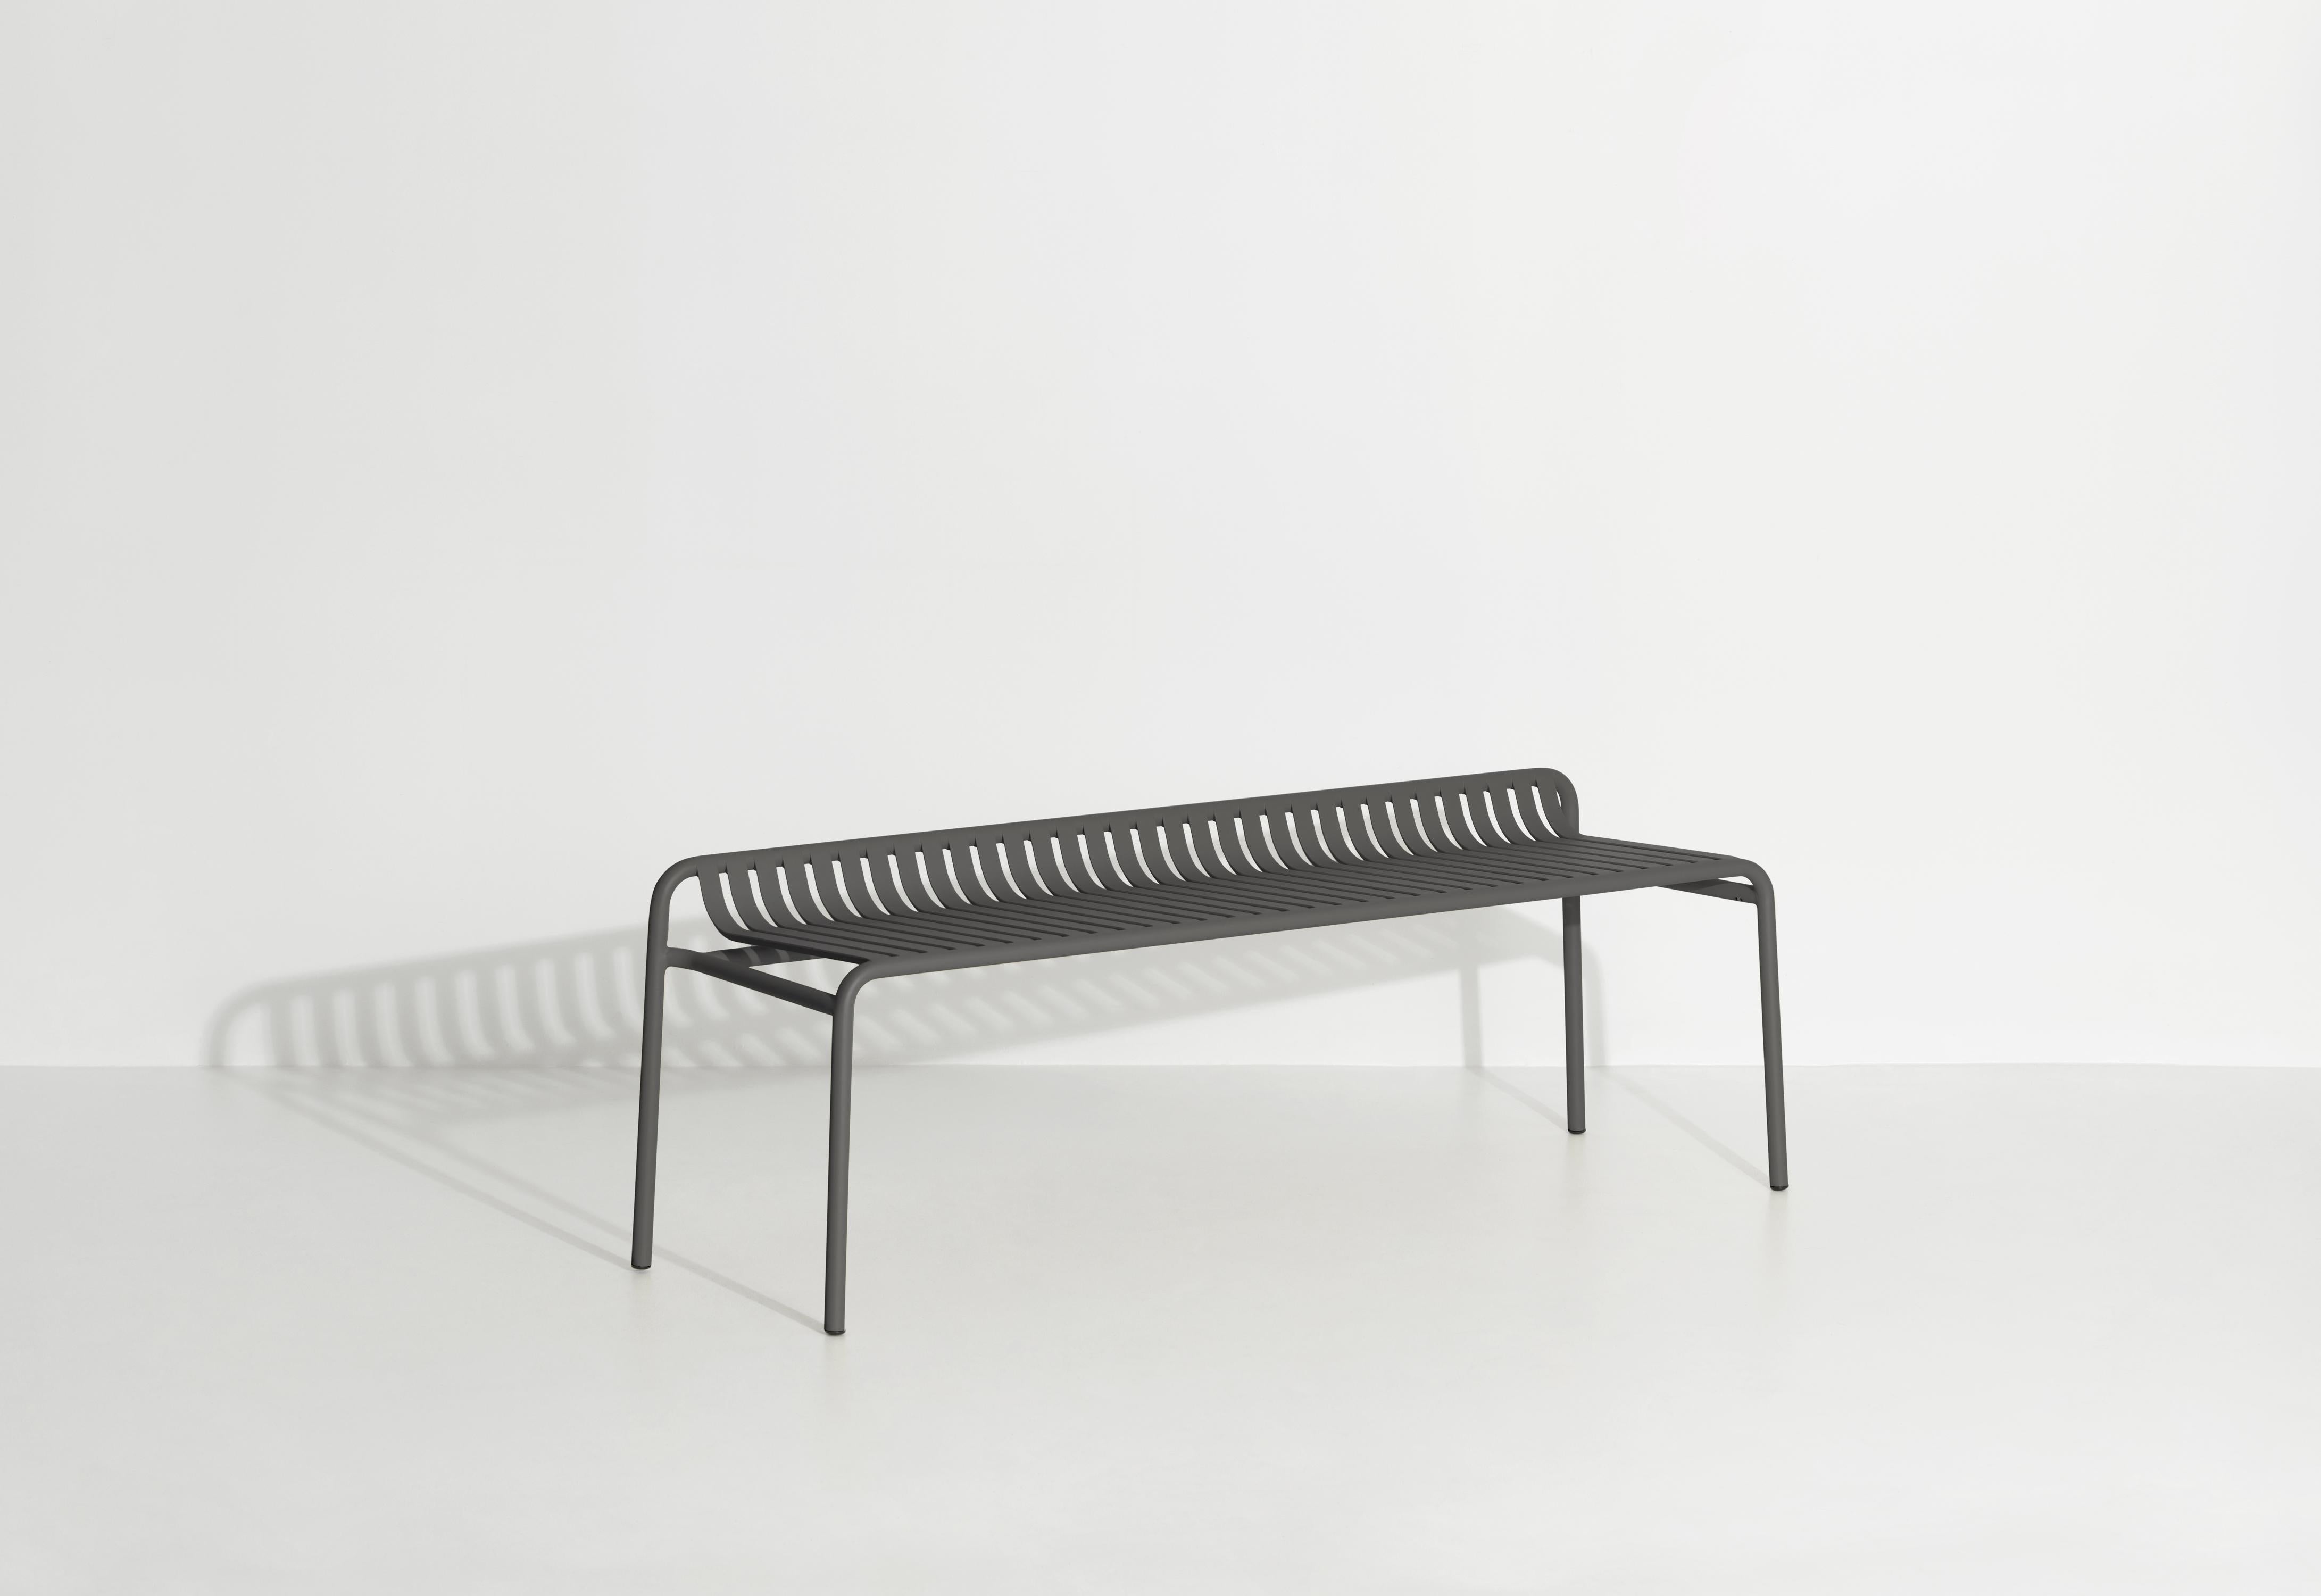 Petite Friture Week-End Bench without Back in Anthracite Aluminium by Studio BrichetZiegler, 2017

The week-end collection is a full range of outdoor furniture, in aluminium grained epoxy paint, matt finish, that includes 18 functions and 8